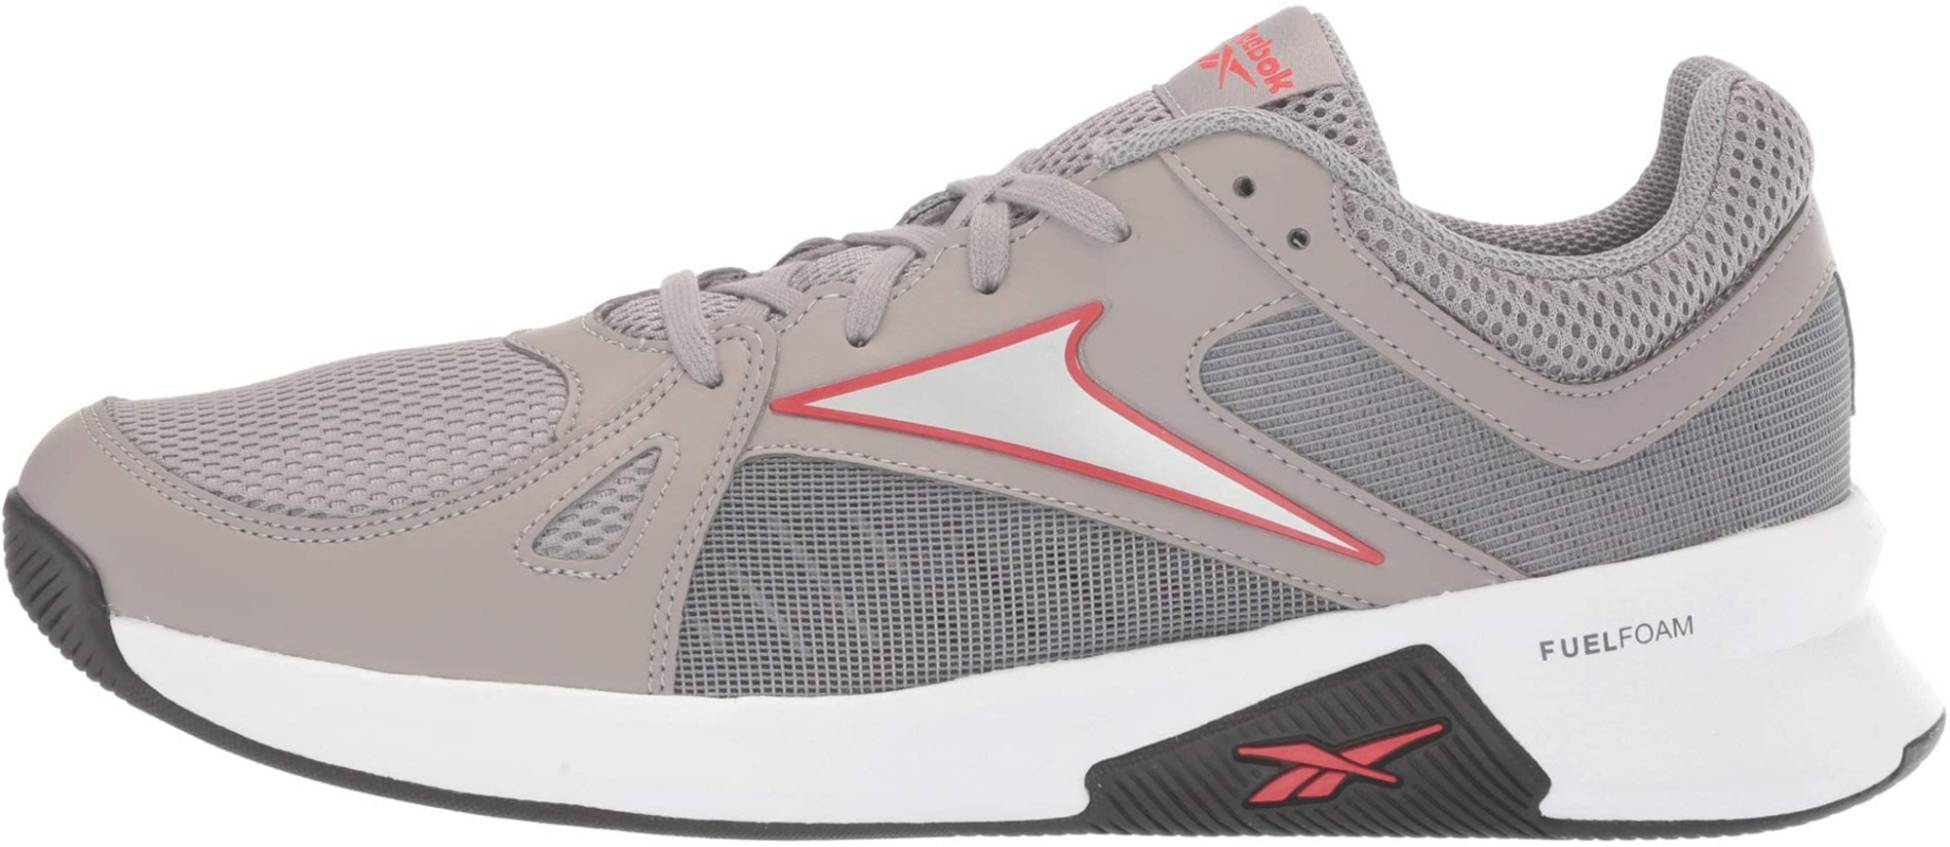 reebok pure cross trainer review